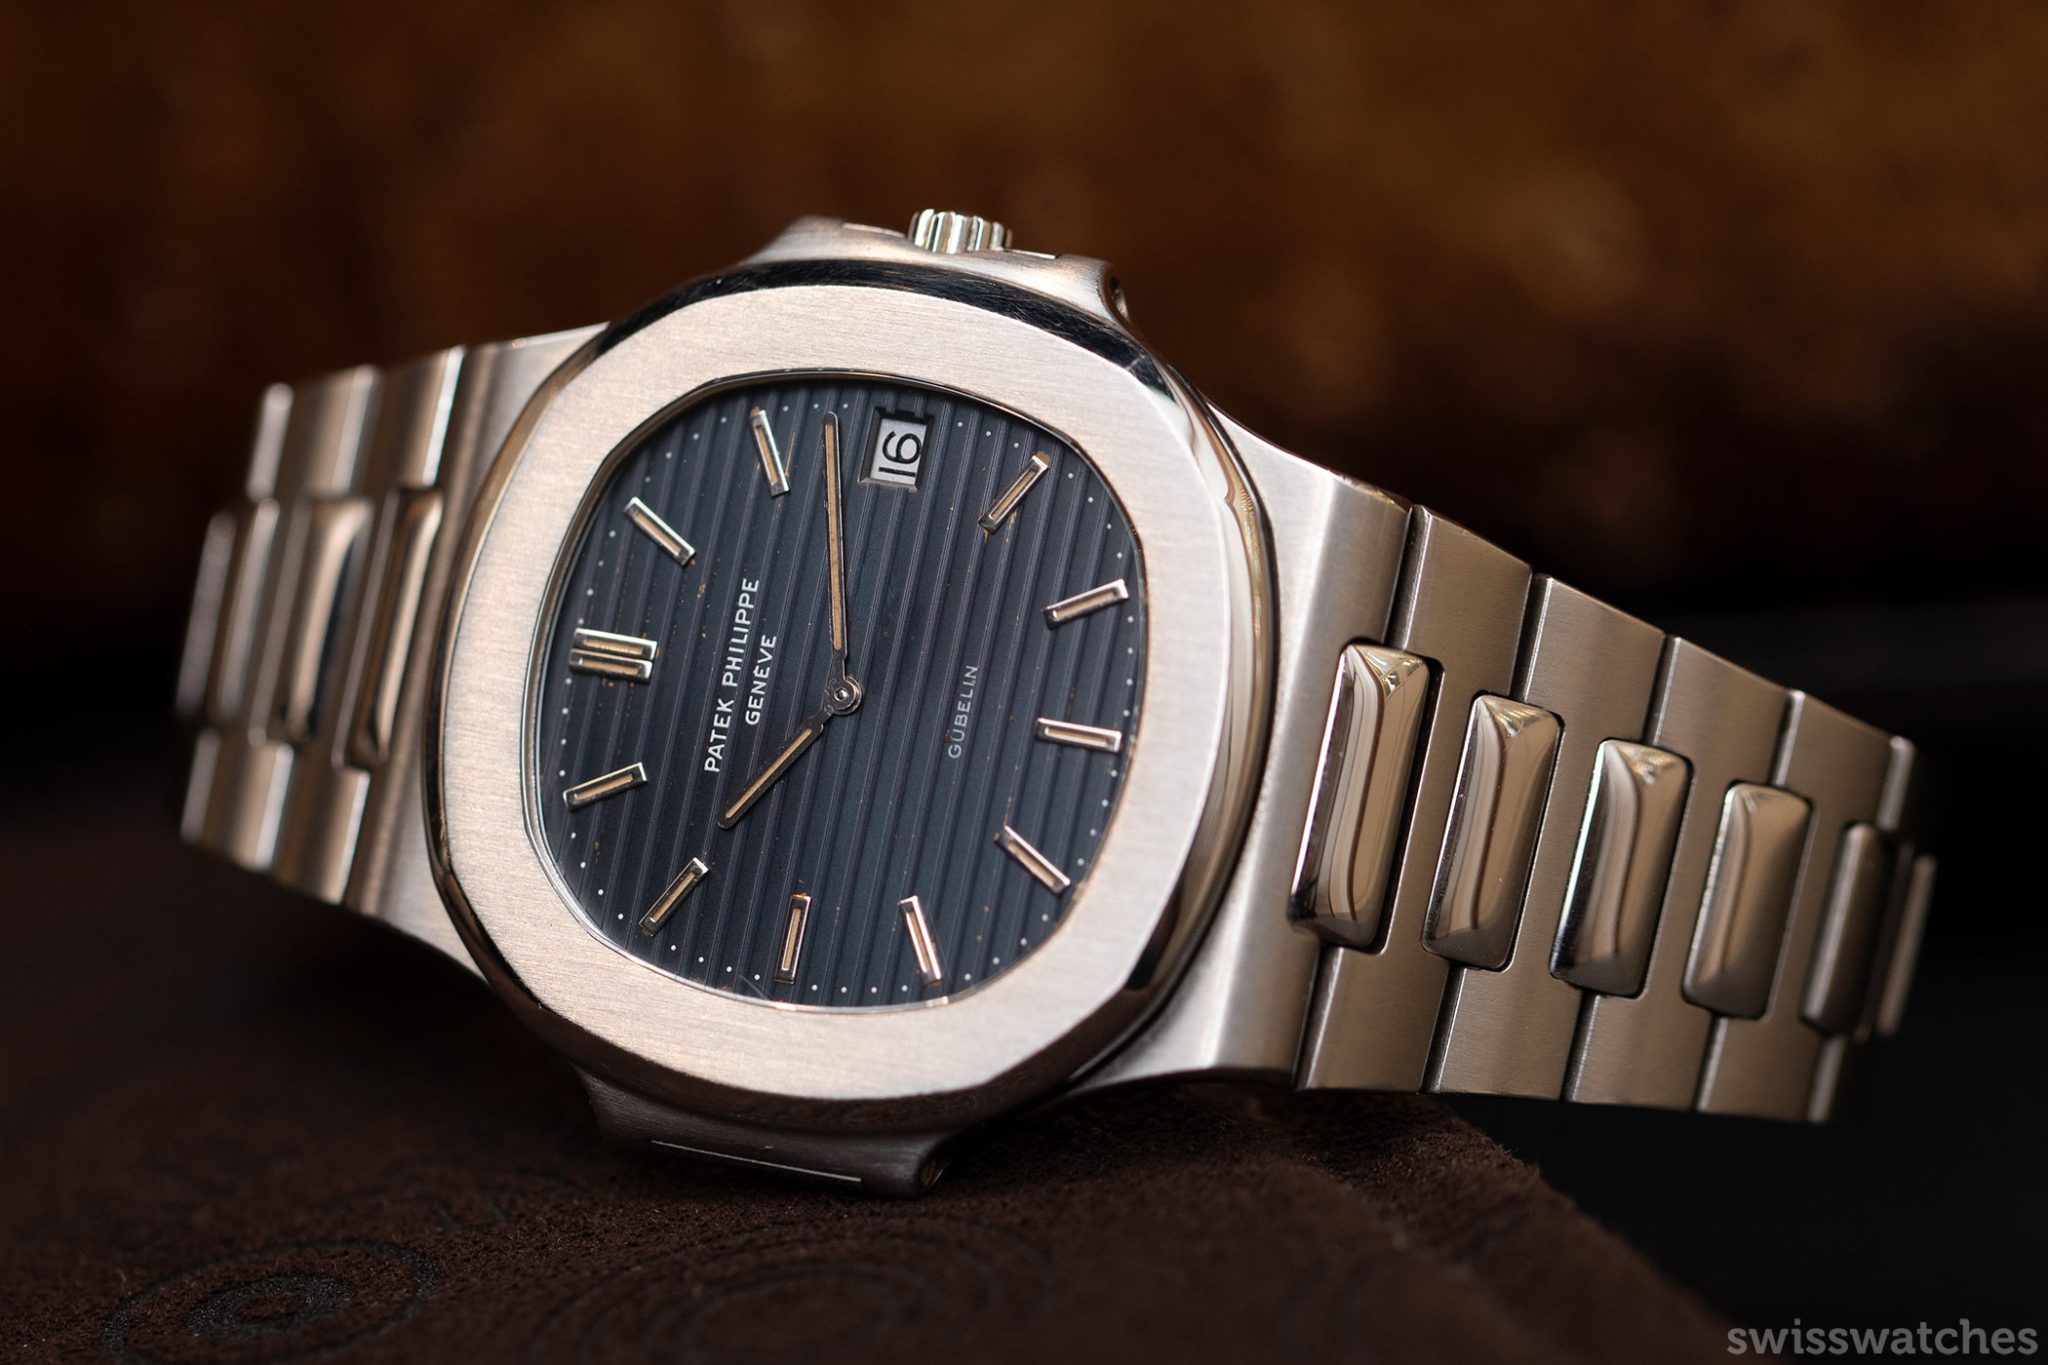 How Tiffany & Co. and Patek Philippe teamed up for the last-ever Nautilus  5711: the luxury watchmaker's most sought-after timepiece gets a 'final'  limited edition run in Tiffany Blue